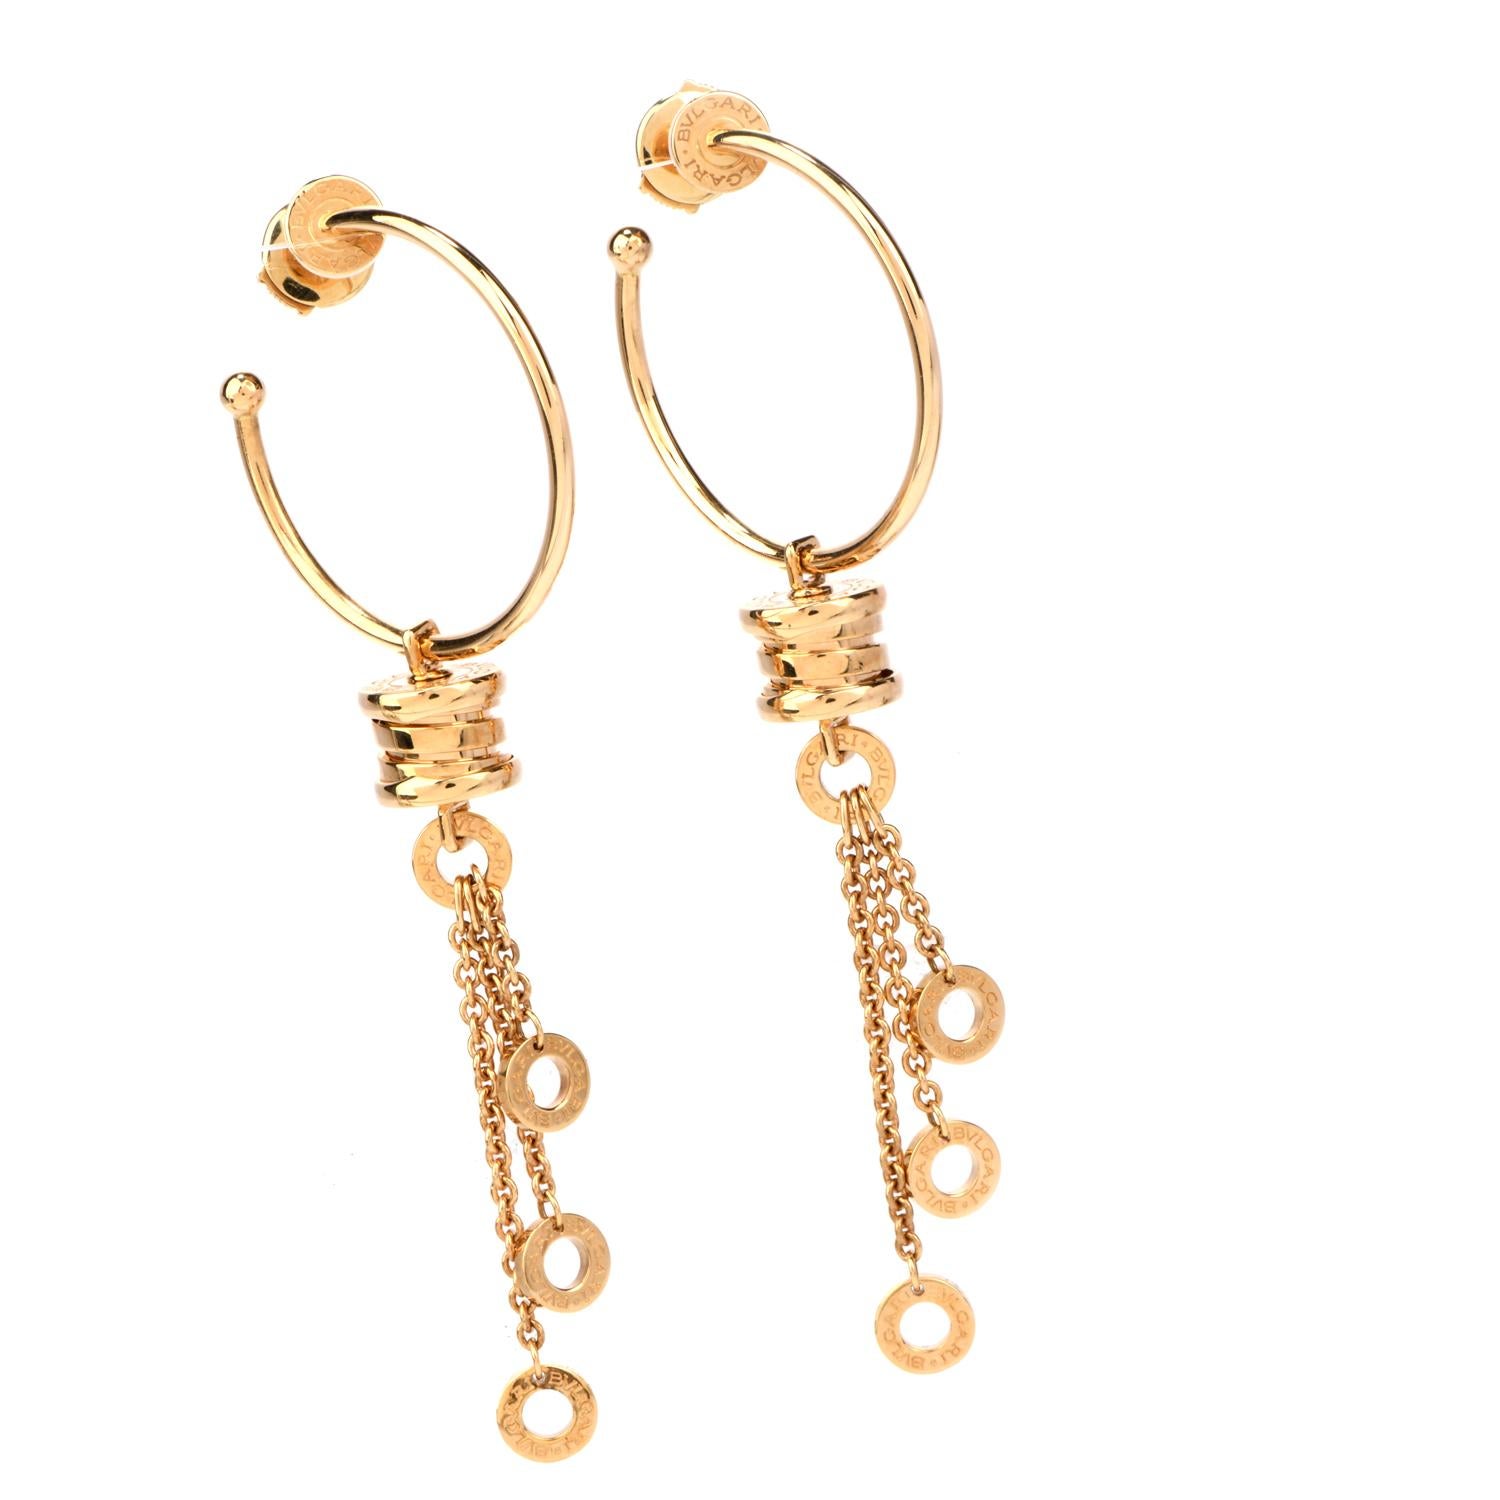 Show your modern and sharp style with these legendary Bvlgari 18K Gold B.Zero1 Dangle Hoop Earrings!  These

collectible earrings are crafted in 18 karat yellow gold.  There are two B.Zero1 style pendants on either hoop, with 8 drop chains with